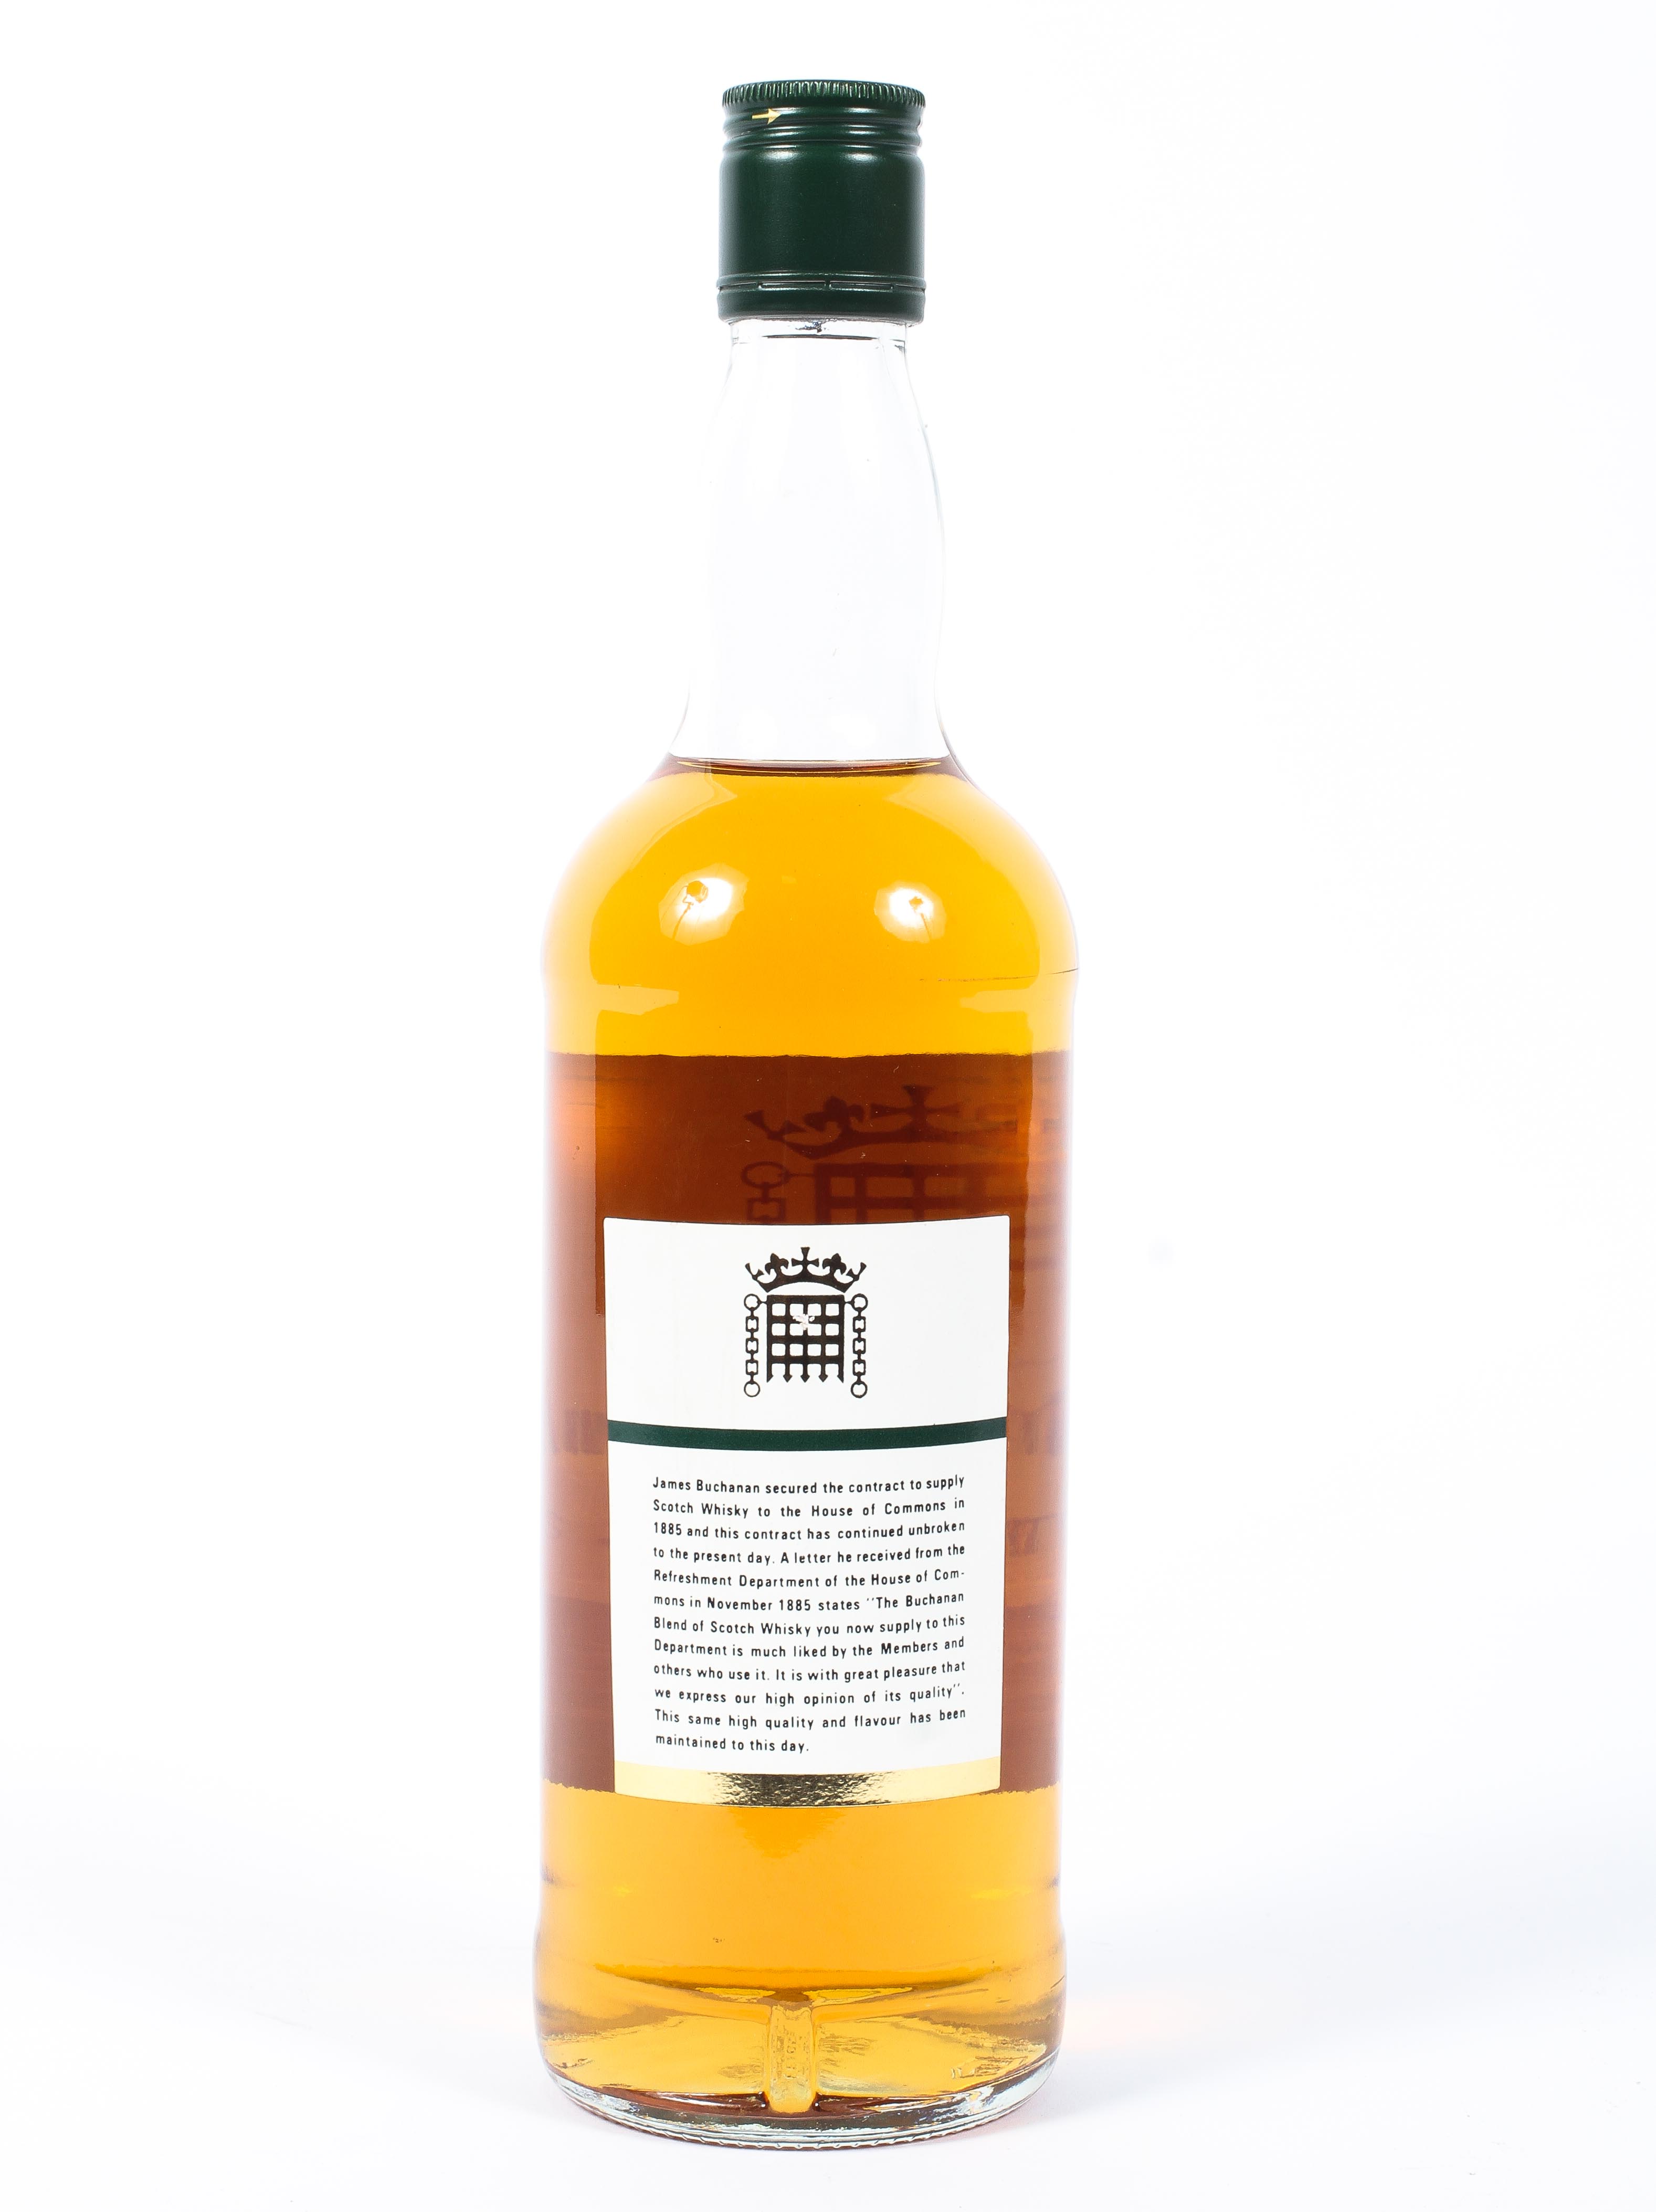 Whisky. A bottle of House of Commons No.1 Scotch whisky by James Buchanan Company, Glasgow. - Image 2 of 2